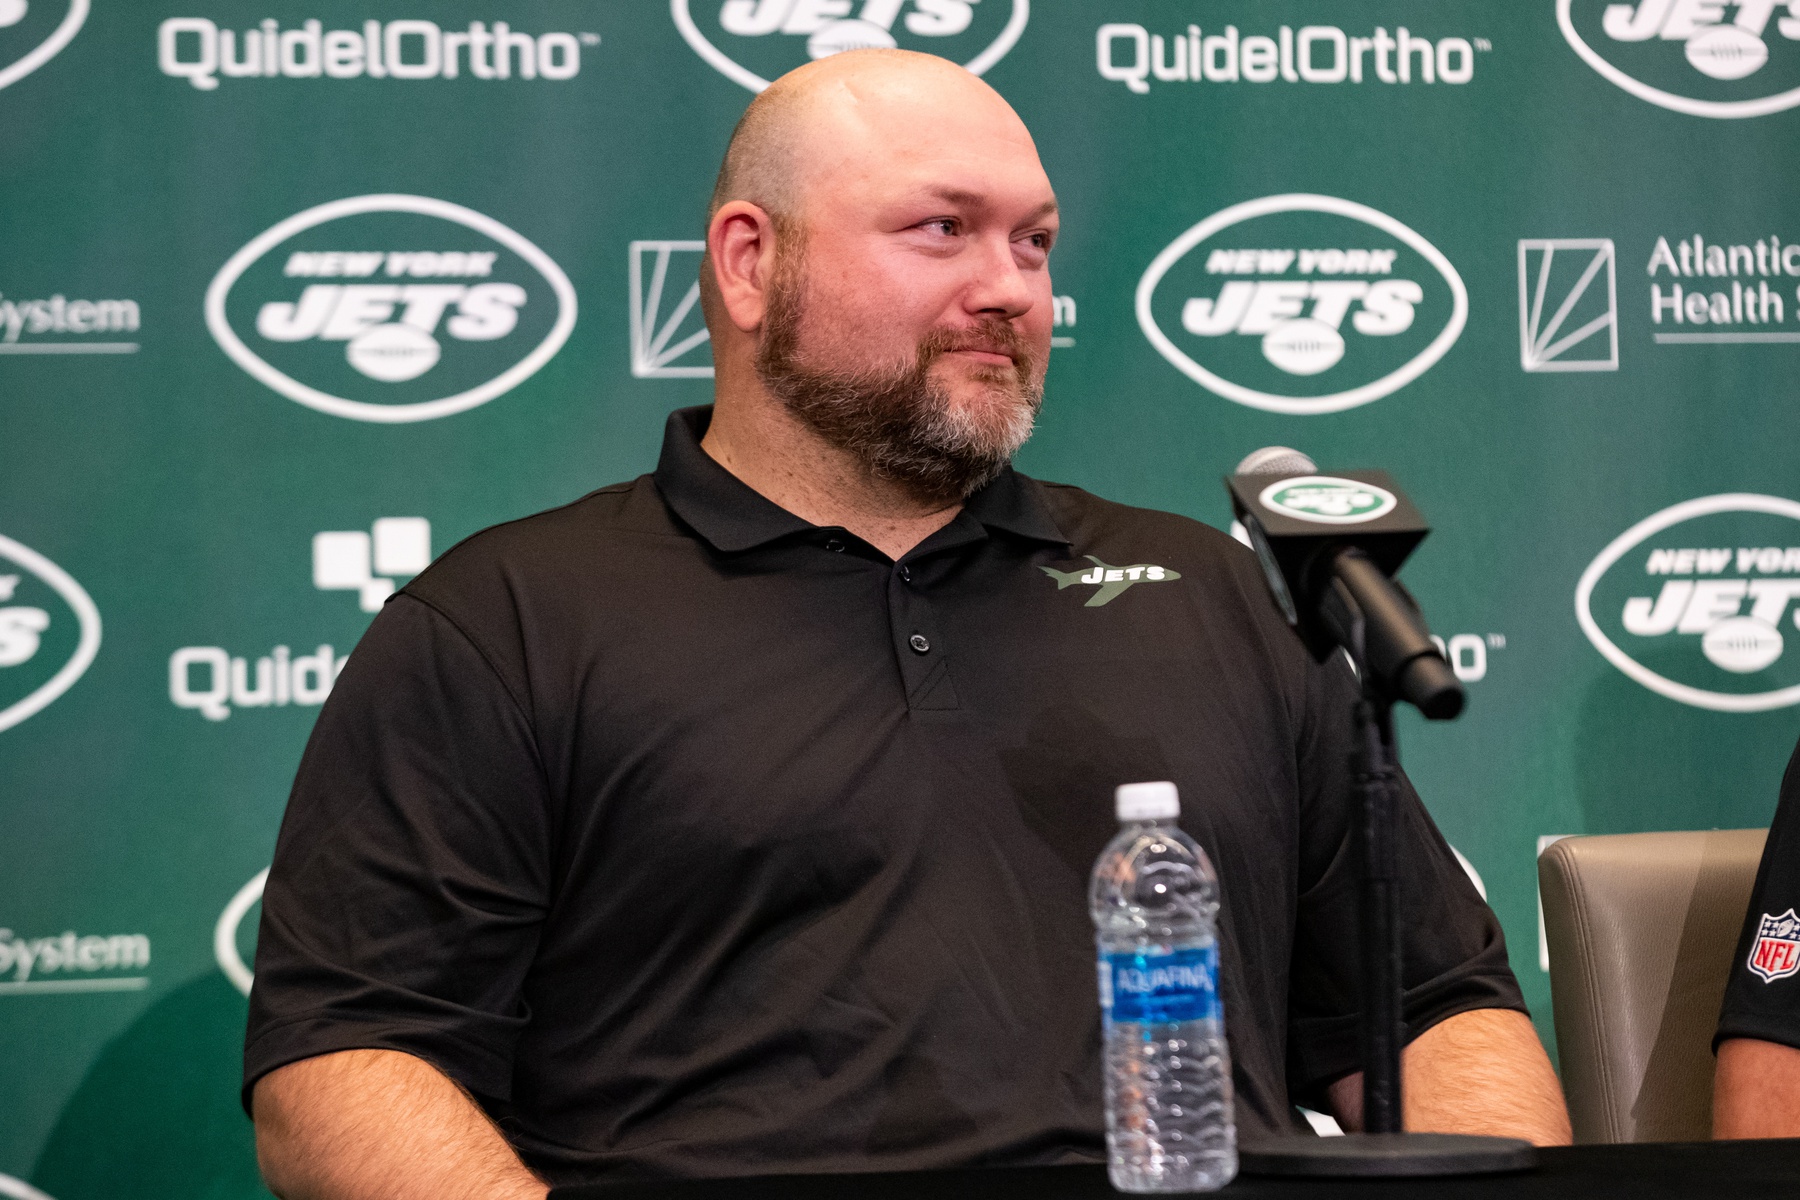 The New York Jets offensive weaponry needs no major additions